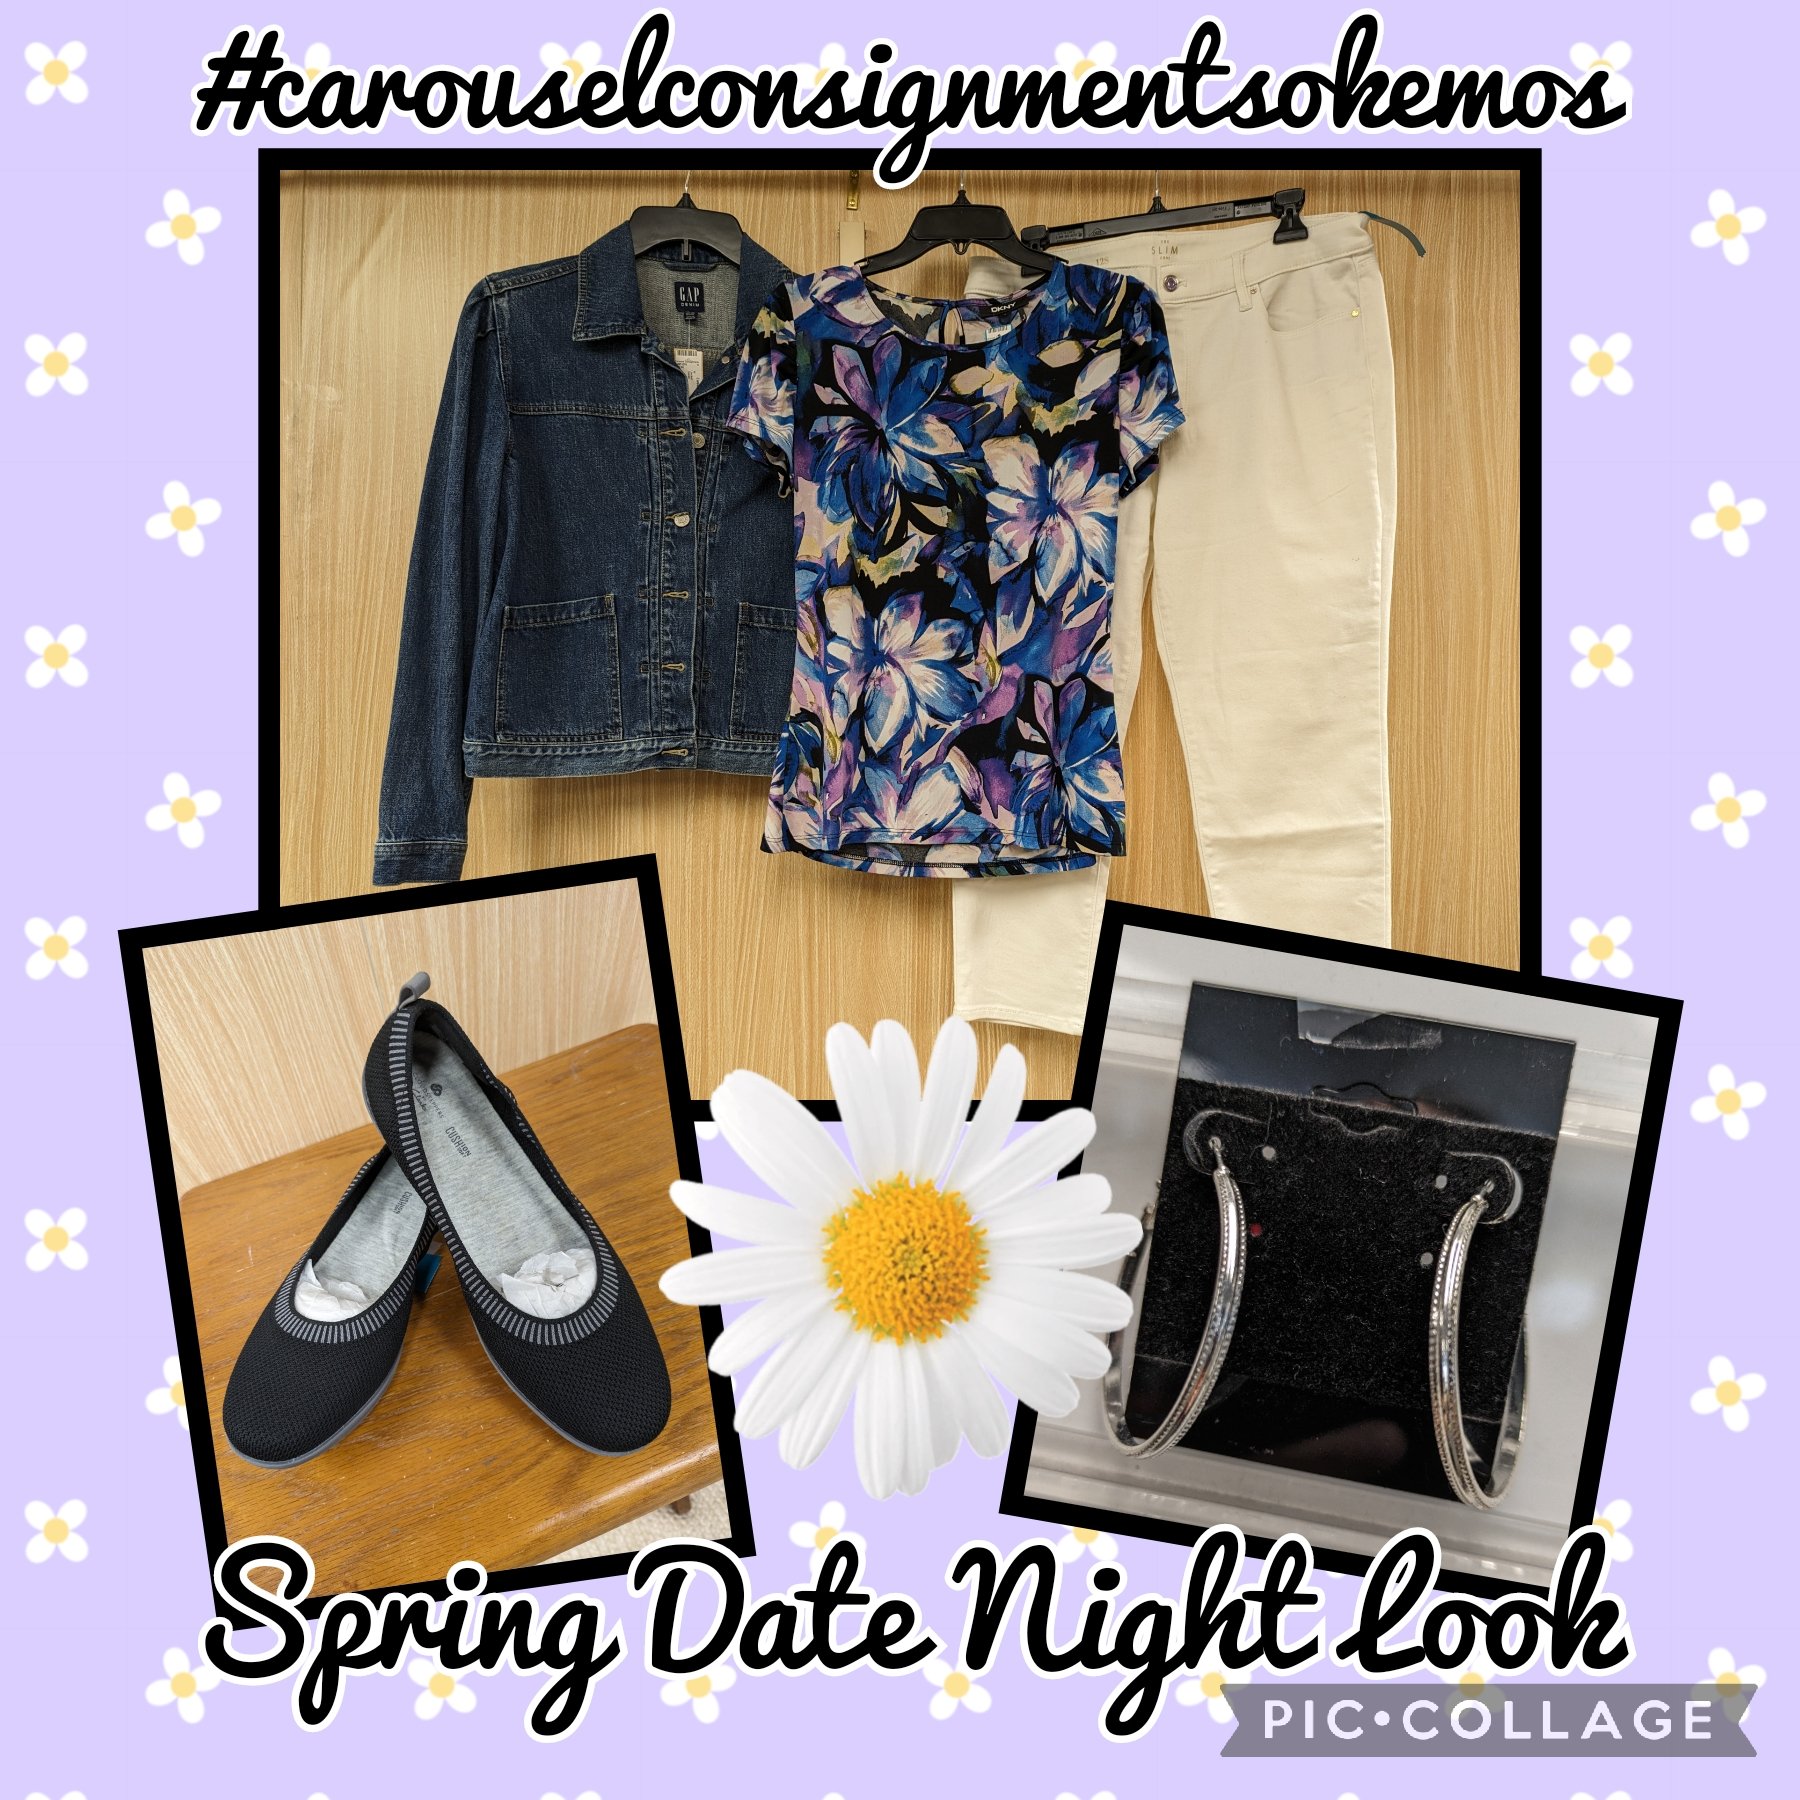 💖Spring Date Night💖
DKNY Print Blouse Size Large $10
Gap Denim Jacket Size Large $18
White House Black Market White Jeans Size 12 $24
Clarks Neutral Shoes Size 8 $22
Silver Earrings $6
#carouselconsignmentsokemos #shoplocal #shopsmall #shopsmallbus